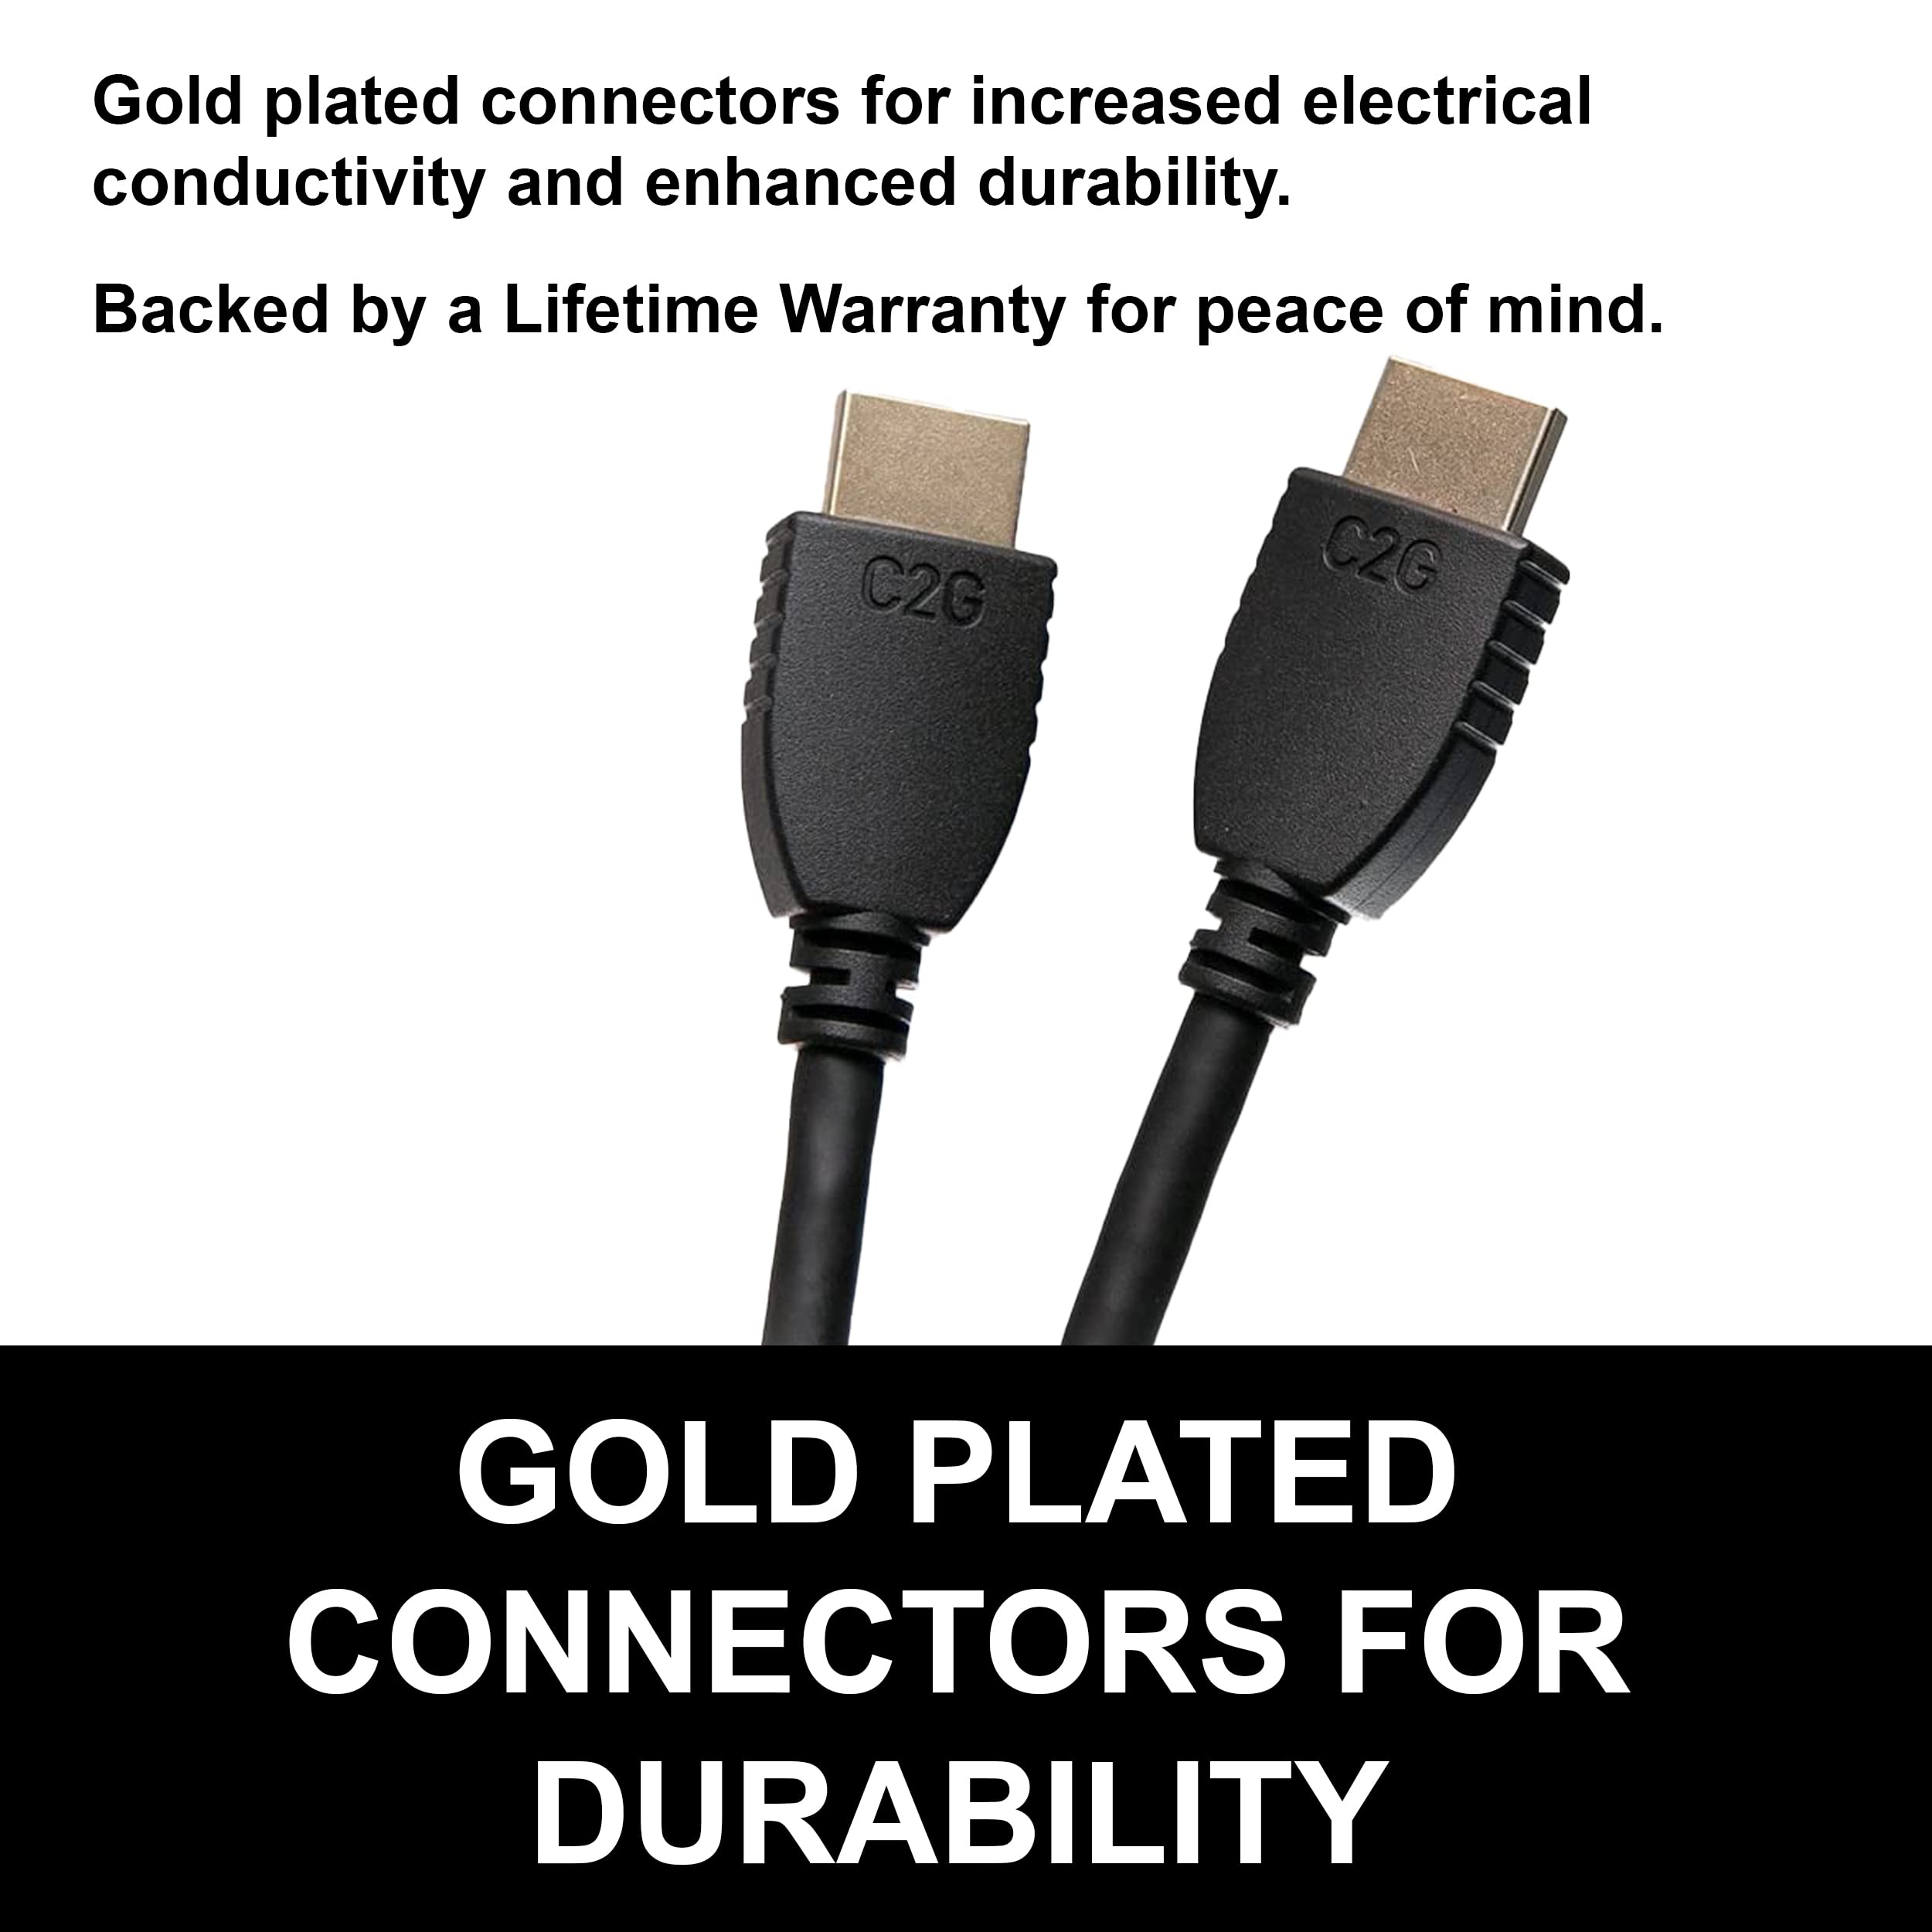 C2G 40304 4K 60Hz High-Speed HDMI Cable With Ethernet, 6.56 Feet (2 Meters), Black